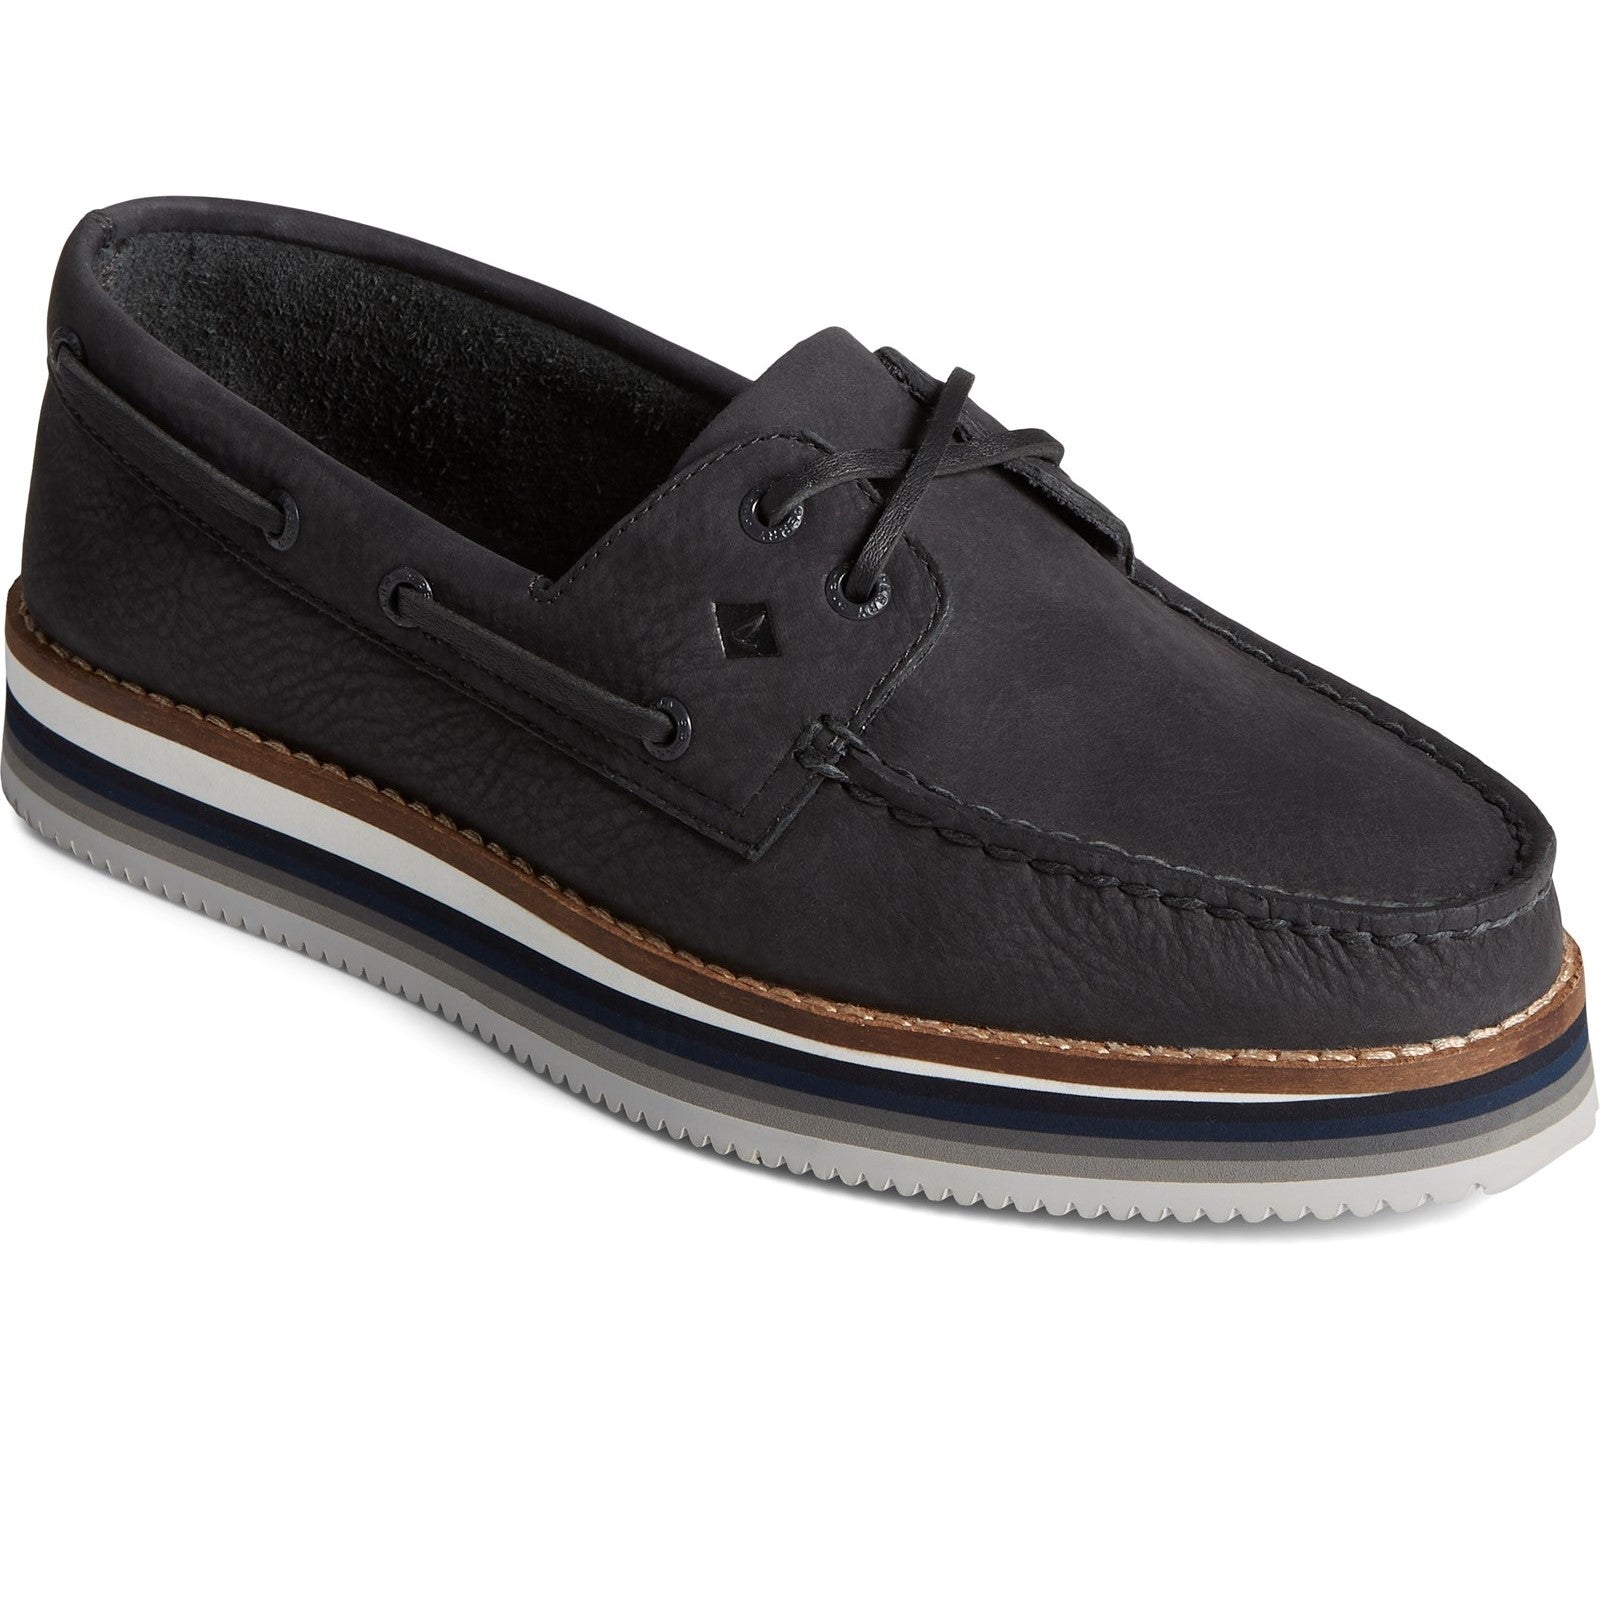 Sperry Authentic Original Stacked Boat Shoe